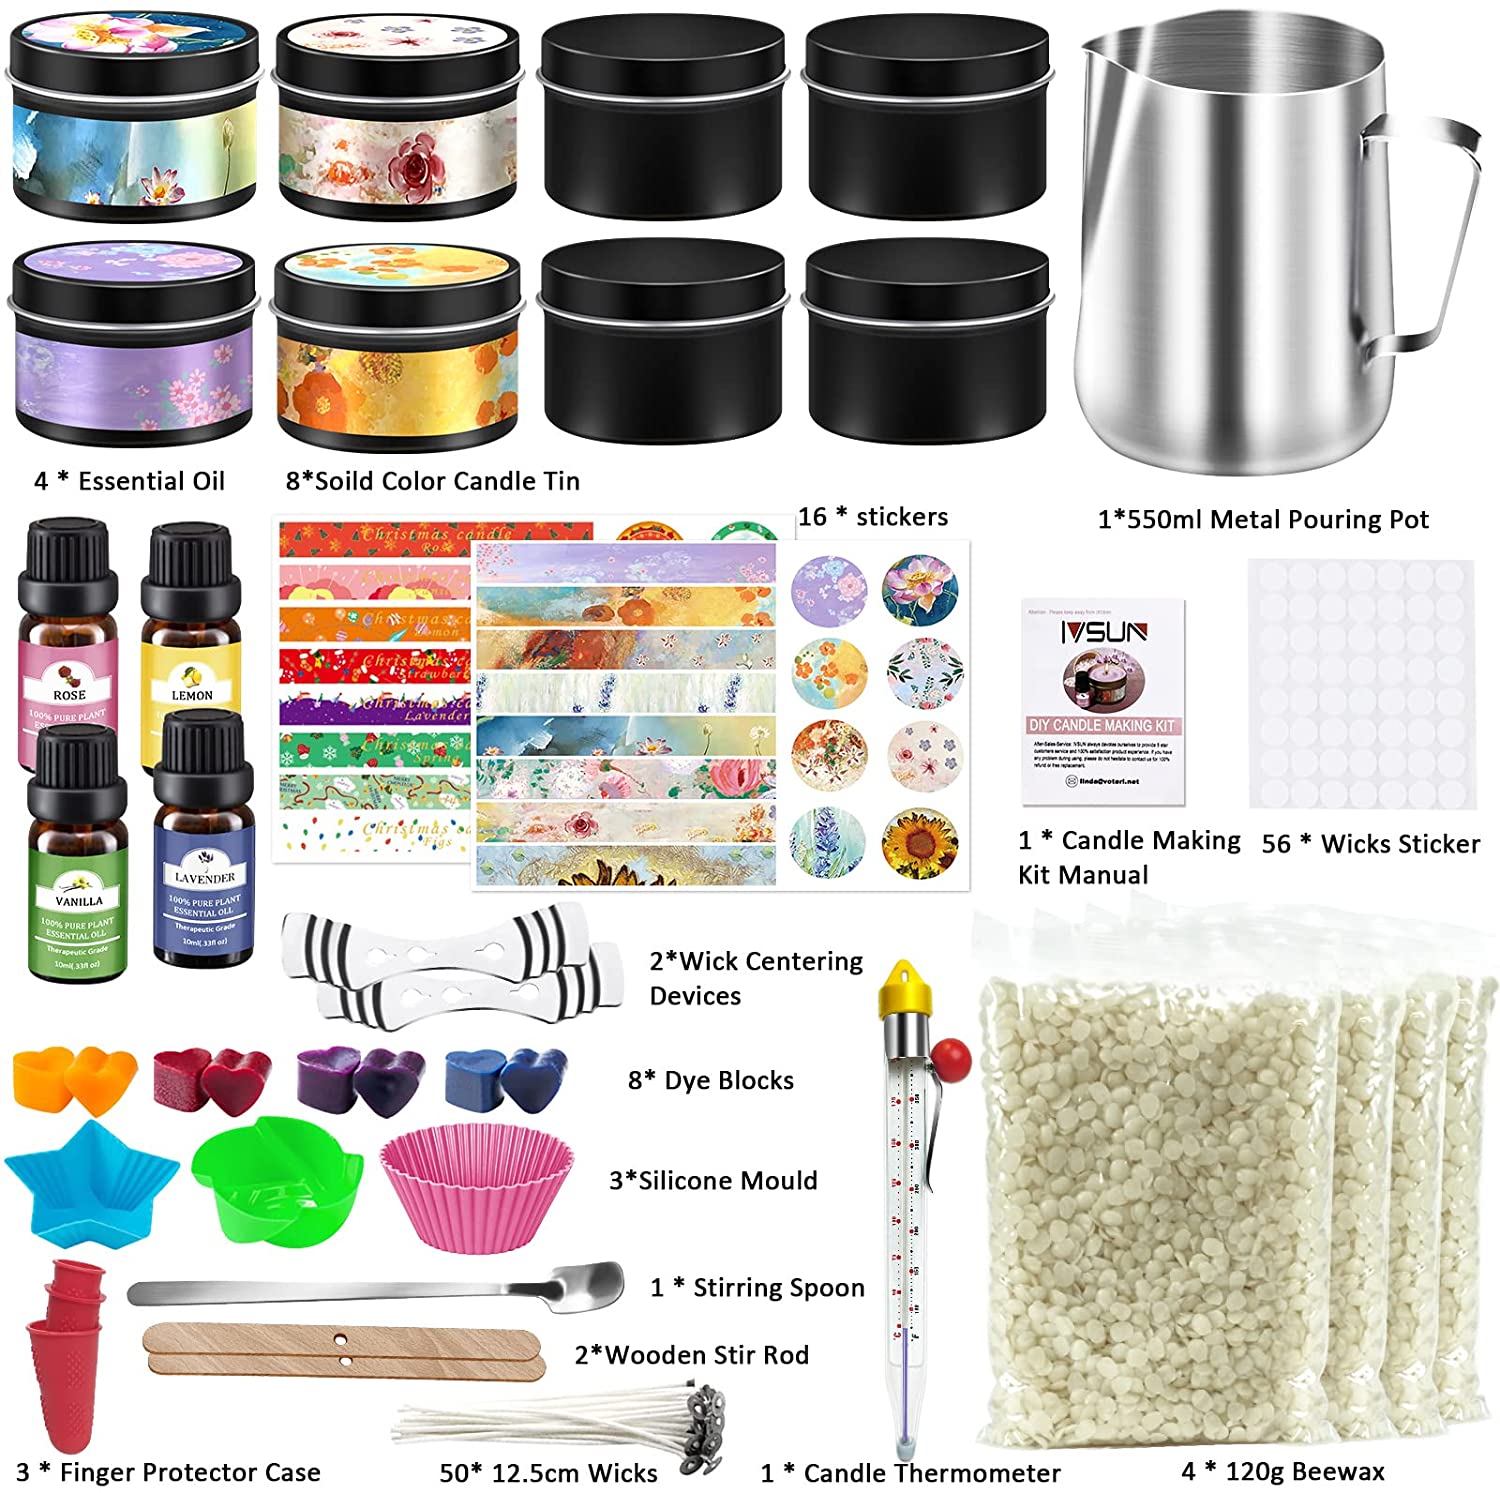 DIY Candle Making Kit for Adults and Kids, Candle Making Supplies